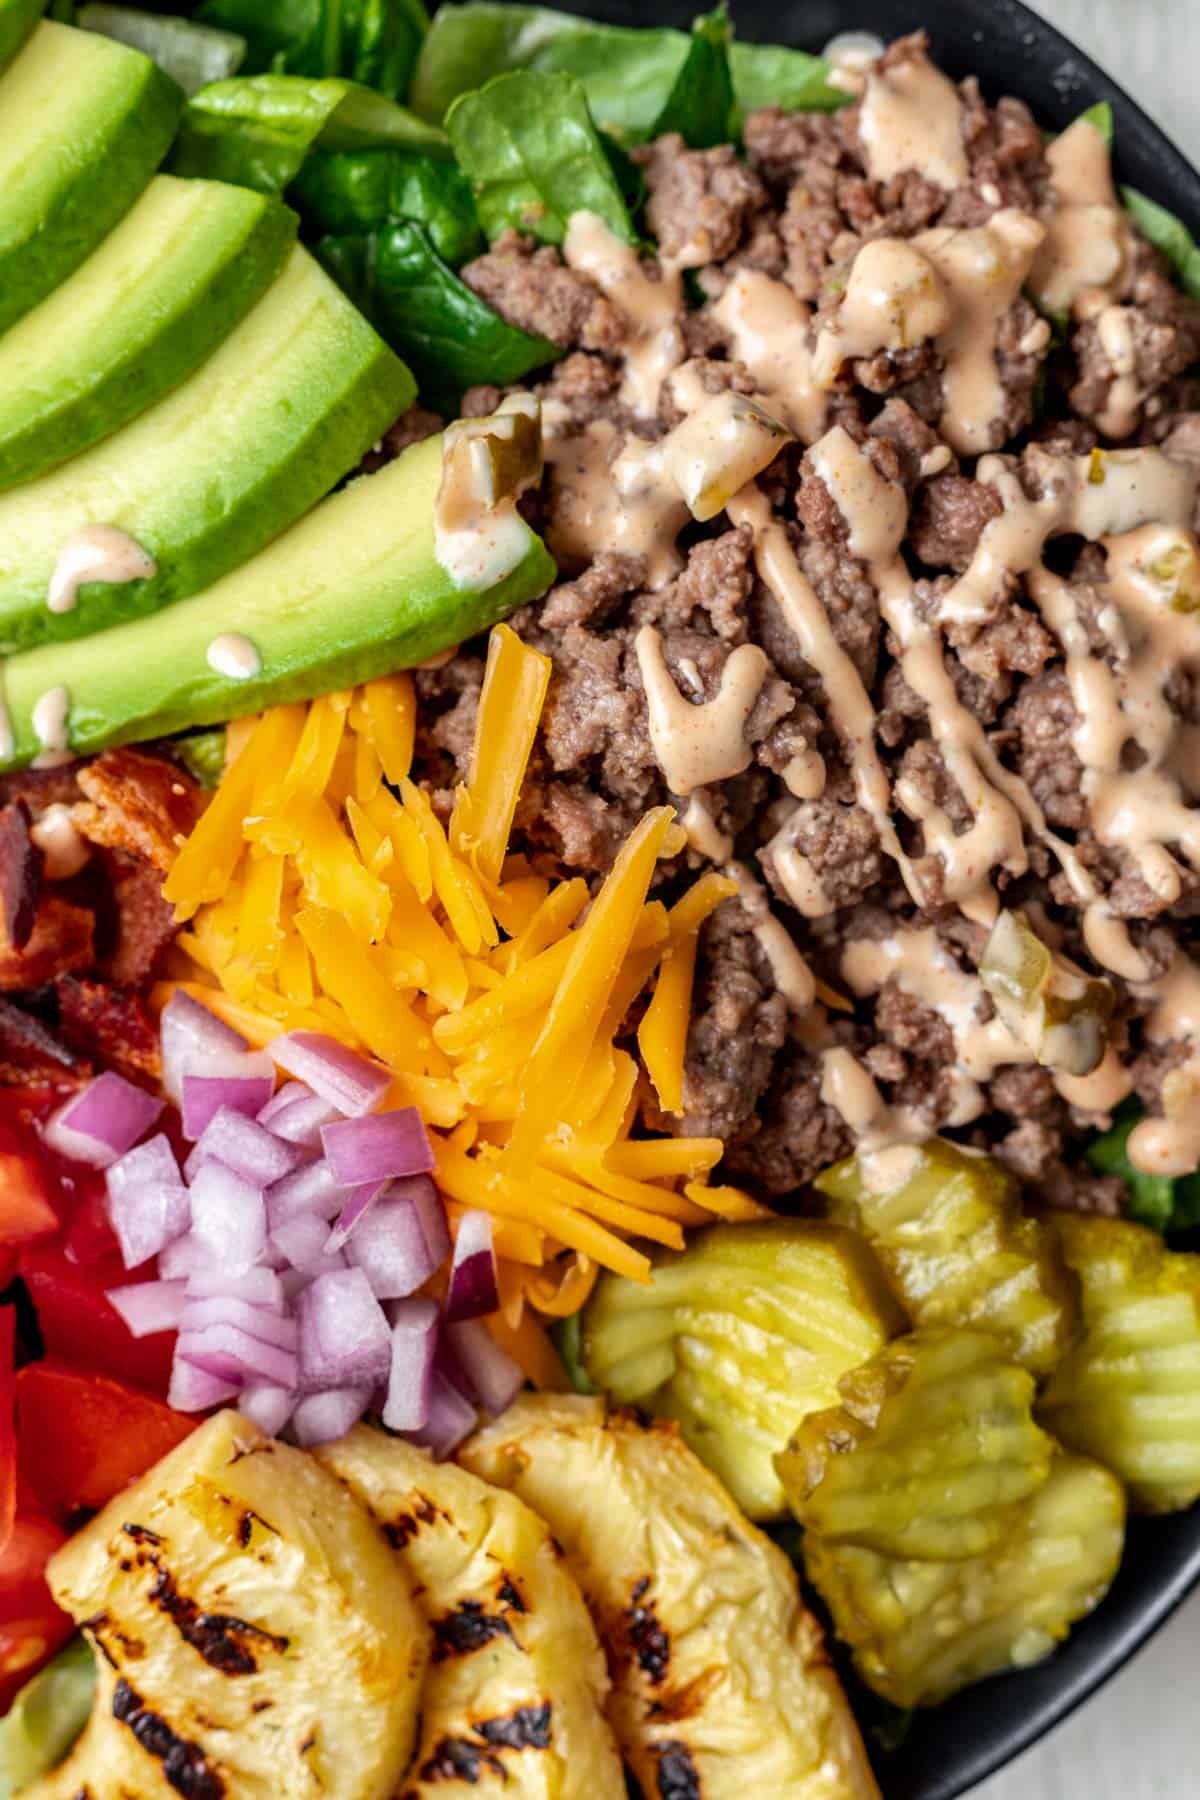 A close up view of all the burger toppings, including ground beef, sauce, pickles, cheese, grilled pineapple, and onions.